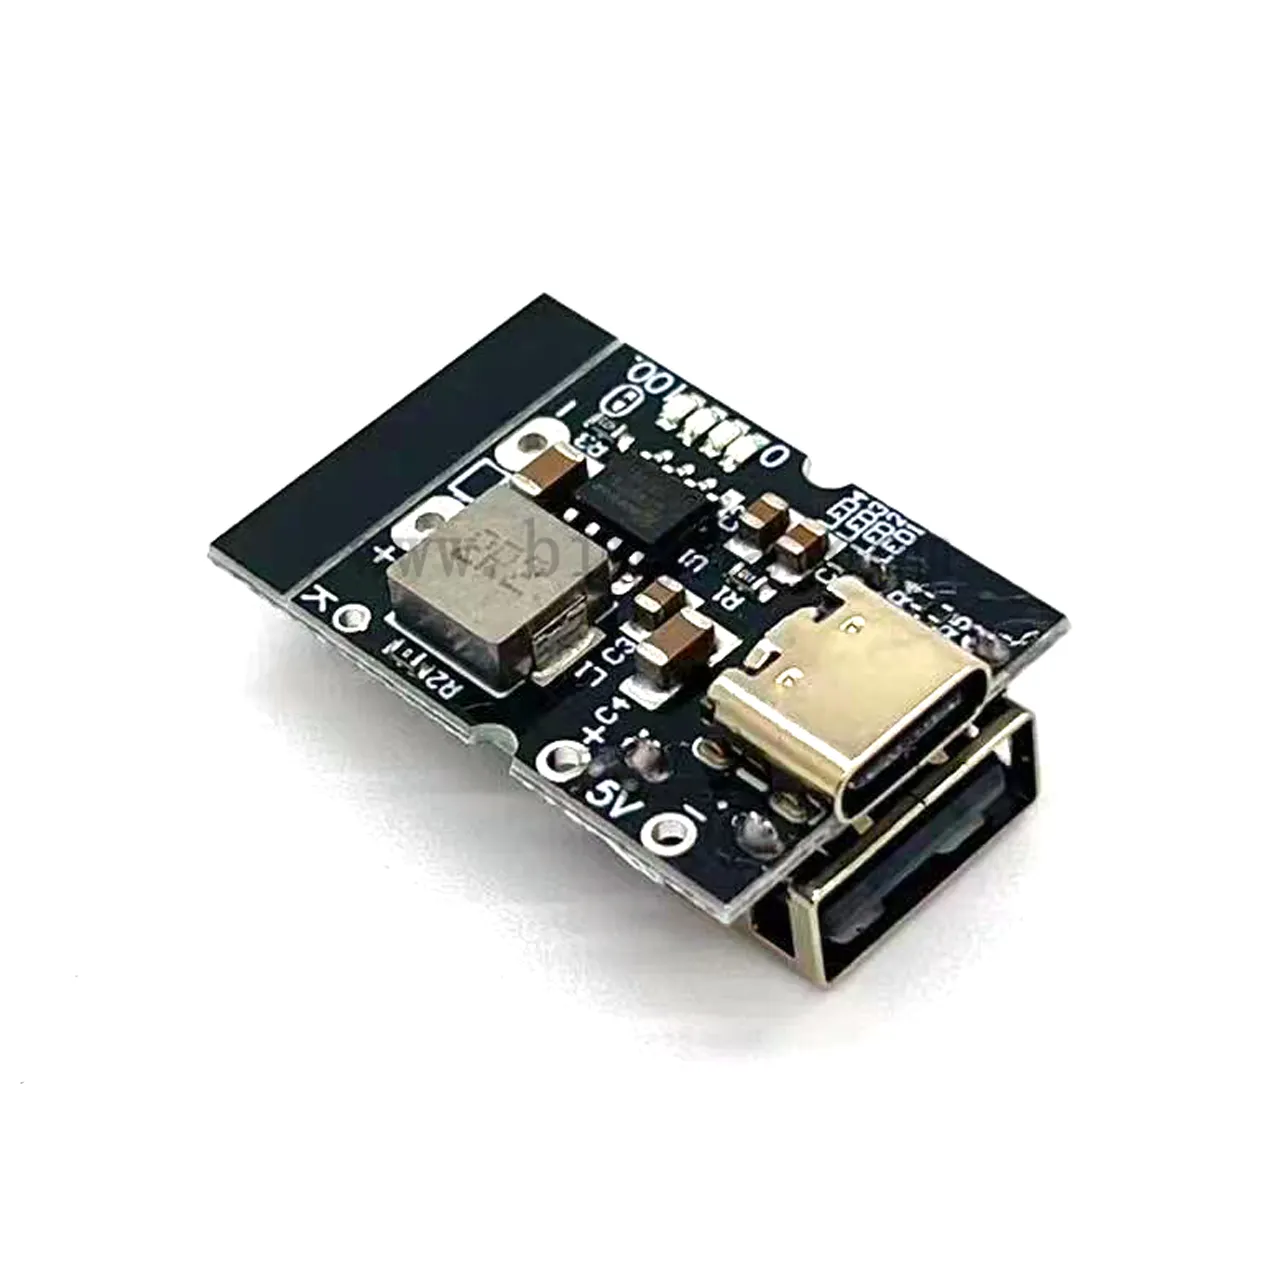 Type-C USB 5V 2A Boost Converter Step-Up Power Module Lithium Battery Charging Protection Board LED Display USB